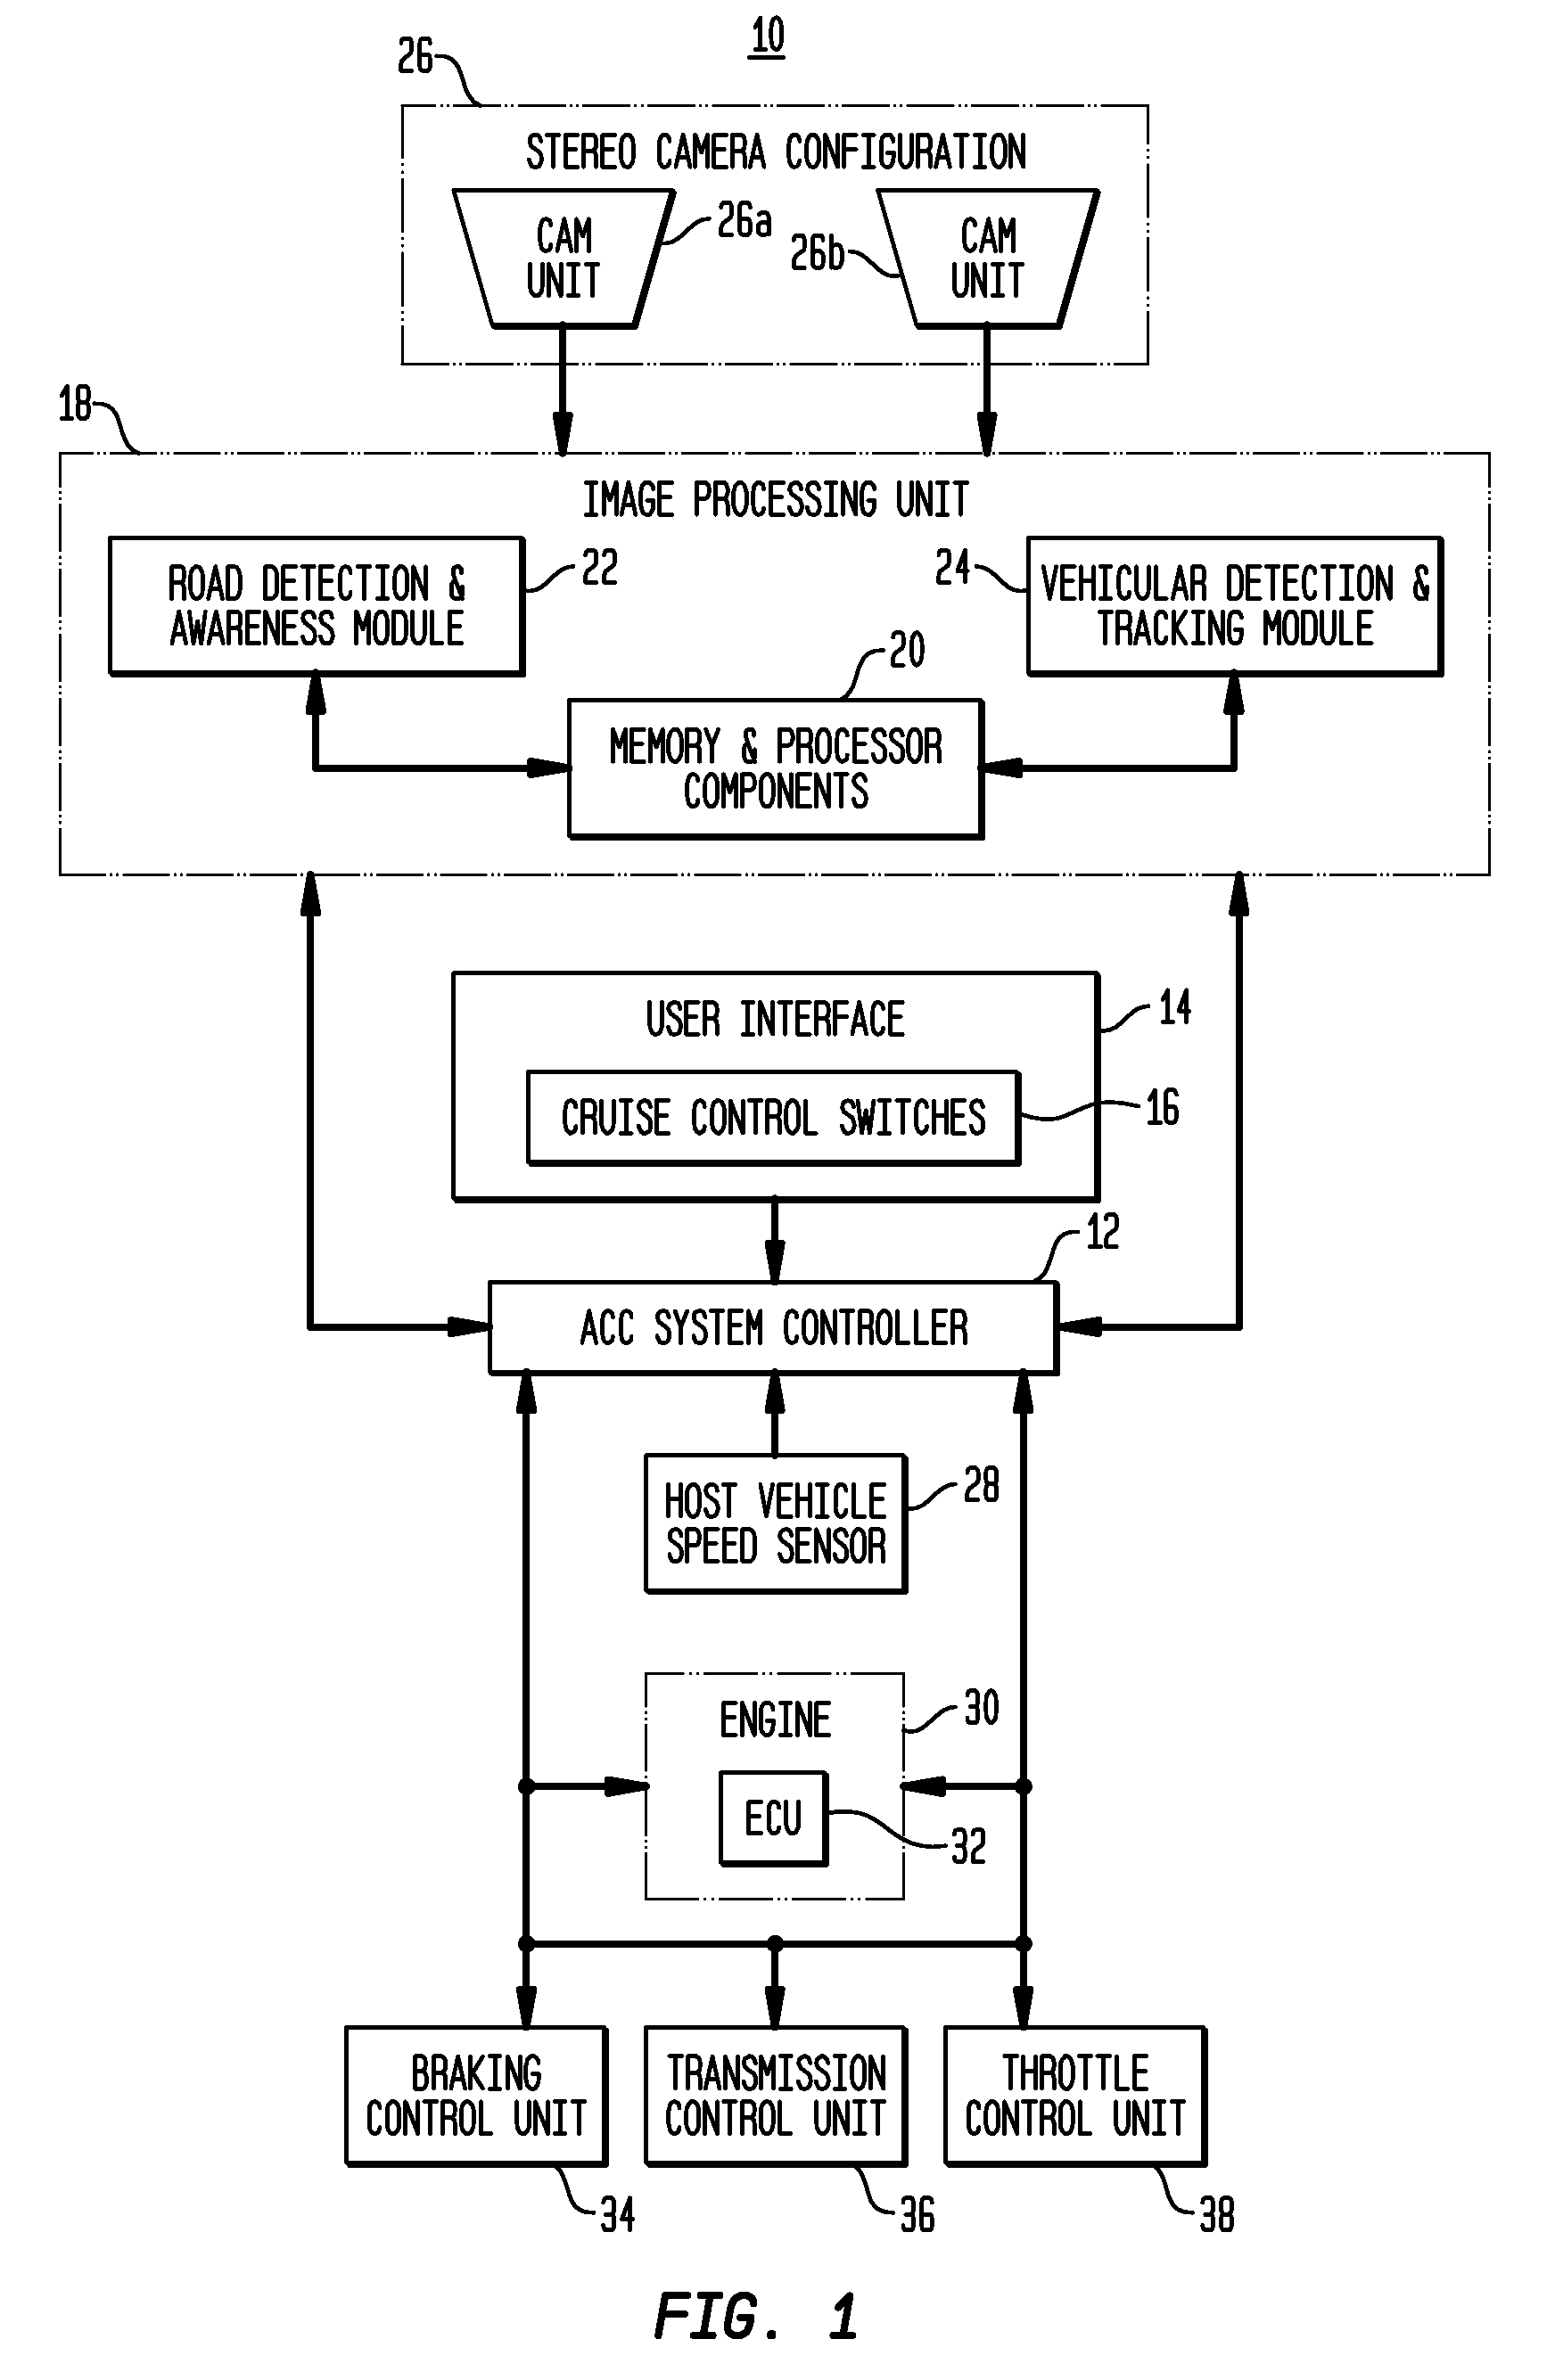 Apparatus and method for object detection and tracking and roadway awareness using stereo cameras